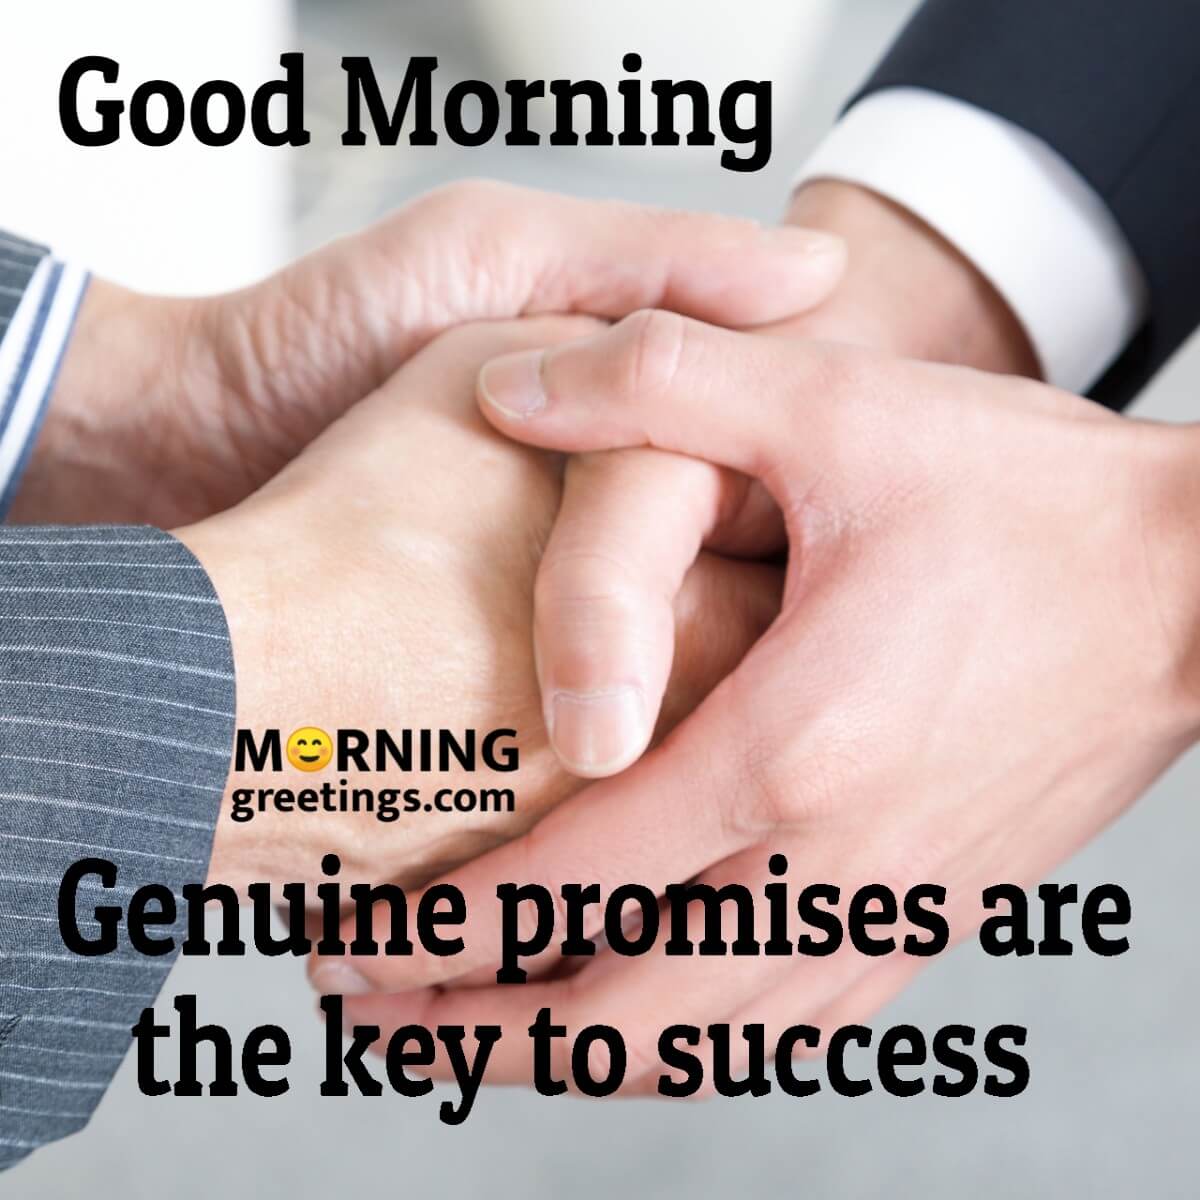 Good Morning Quote On Promise